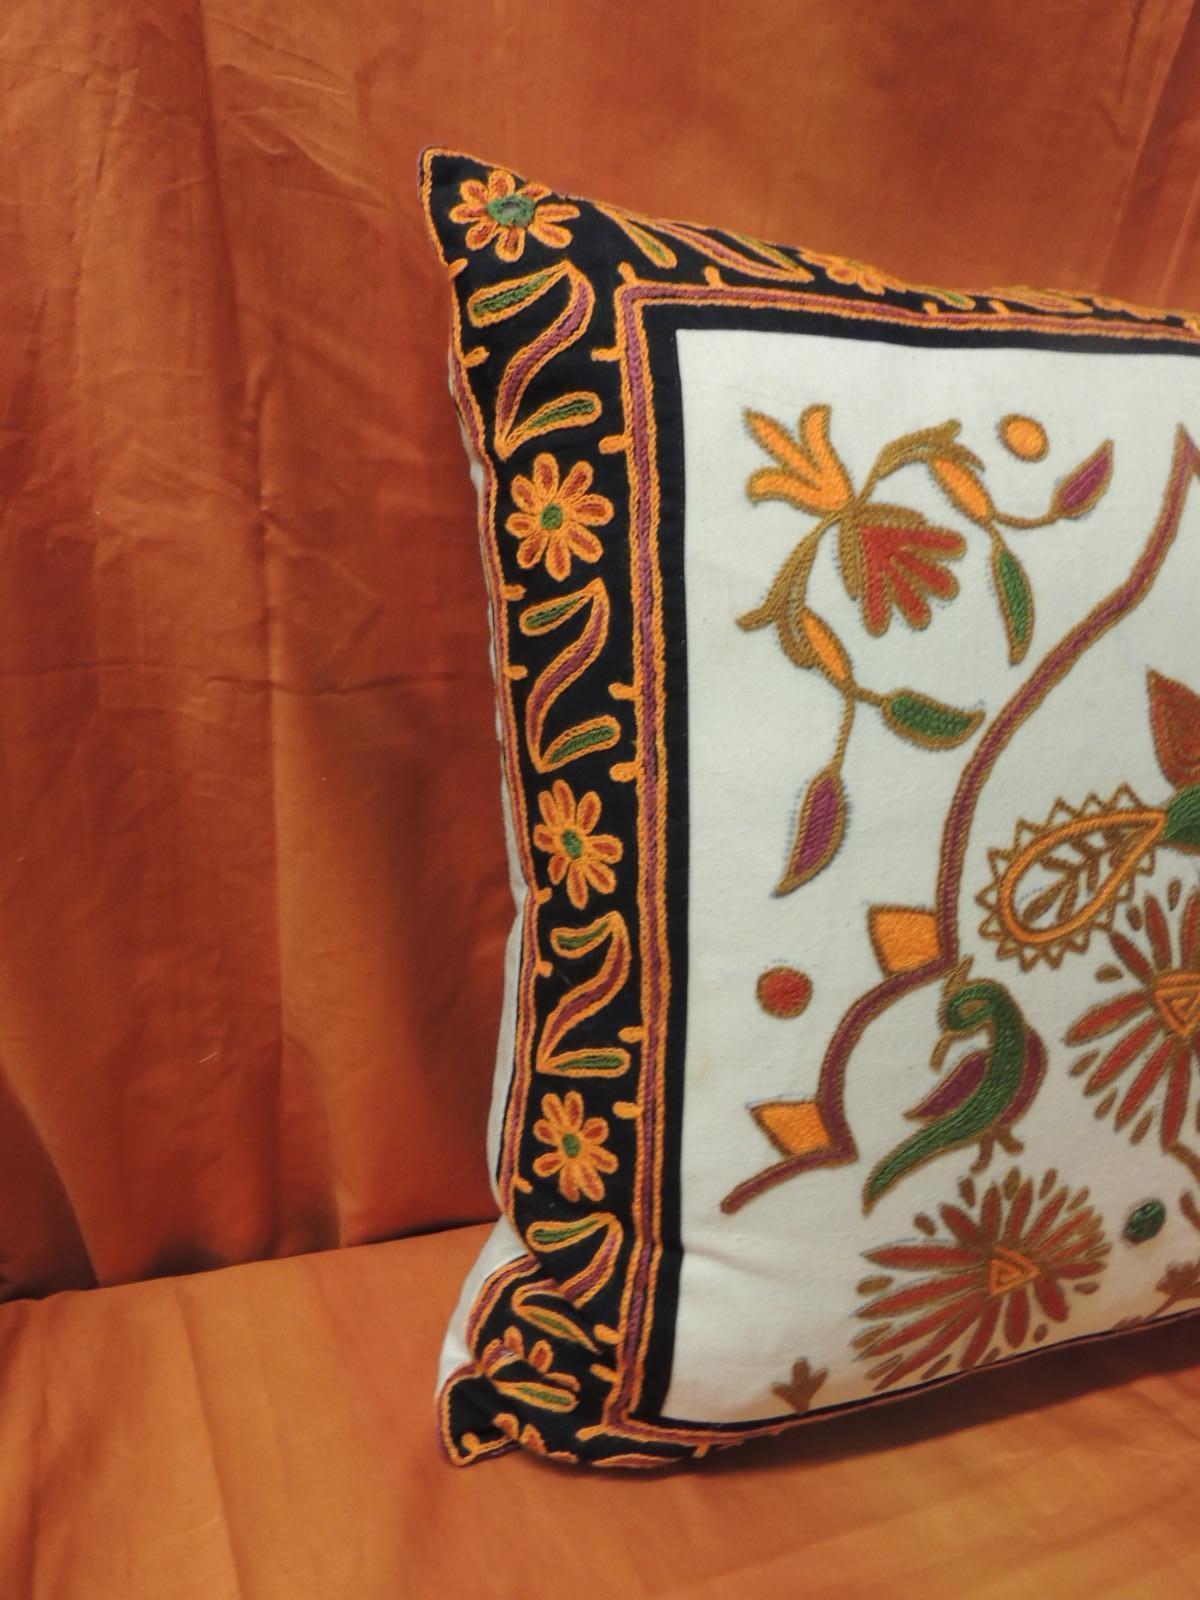 Vintage embroidered orange and green Indian decorative pillow depicting peacocks (Suzani style embroidery)
Natural linen backing. In shades of orange, green, red, black and natural.
Decorative pillow handcrafted and designed in the USA. Closure by